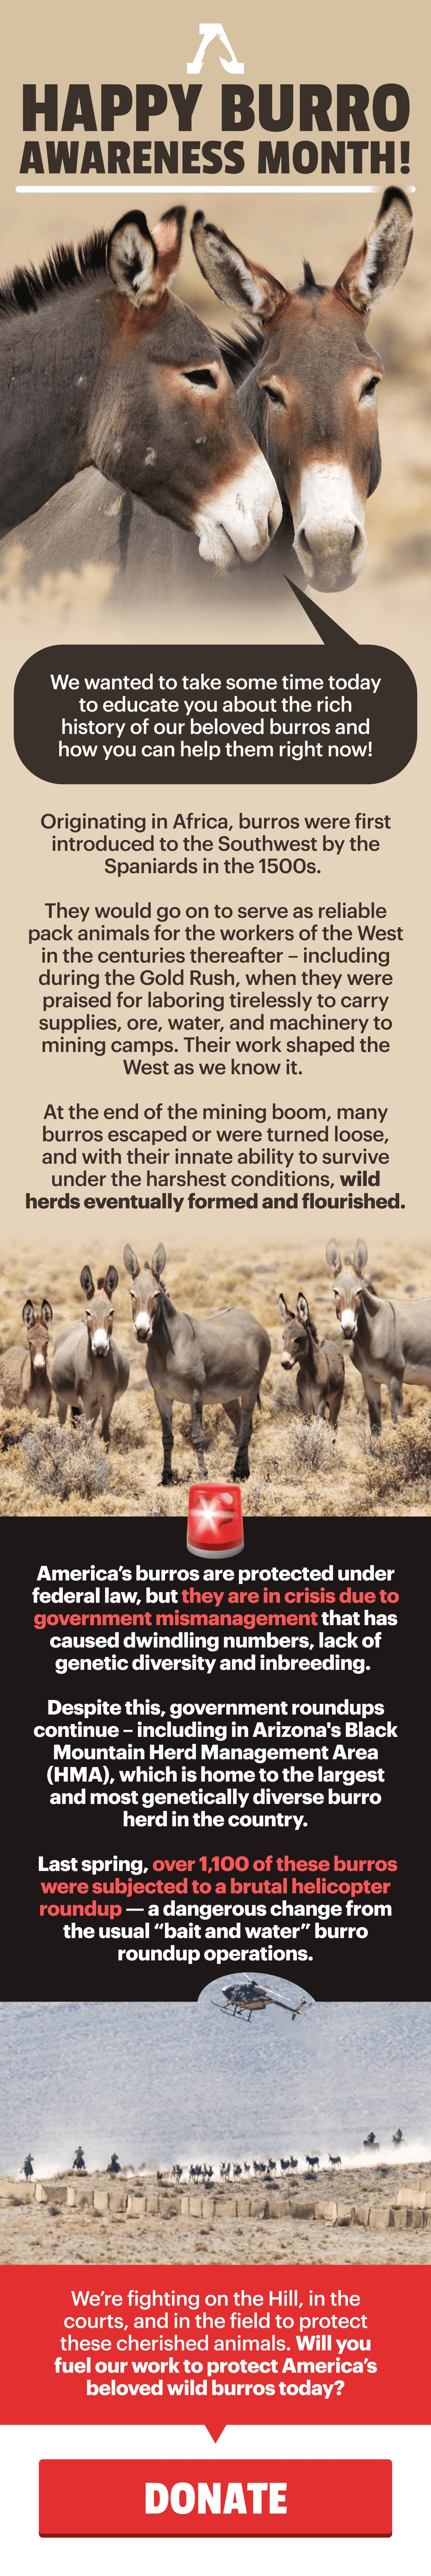 Happy Burro Awareness Month!  We wanted to take some time today to educate you about the rich history of our beloved burros and how you can help them right now!  Originating in Africa, burros were first introduced to the Southwest by the Spaniards in the 1500s.   They would go on to serve as reliable pack animals for the workers of the West in the centuries thereafter – including during the Gold Rush, when they were praised for laboring tirelessly to carry supplies, ore, water, and machinery to mining camps. Their work shaped the West as we know it.   At the end of the mining boom, many burros escaped or were turned loose, and with their innate ability to survive under the harshest conditions, wild herds eventually formed and flourished.  America’s burros are protected under federal law, but they are in crisis due to government mismanagement that has caused dwindling numbers, lack of genetic diversity and inbreeding.   Despite this, government roundups continue – including in Arizona's Black Mountain Herd Management Area (HMA), which is home to the largest and most genetically diverse burro herd in the country. Last spring, over 1,100 of these burros were subjected to a brutal helicopter roundup — a dangerous change from the usual “bait and water” burro roundup operations.  We’re fighting on the Hill, in the courts, and in the field to protect these cherished animals. Will you fuel our work to protect America’s beloved wild burros today?  [[DONATE]]